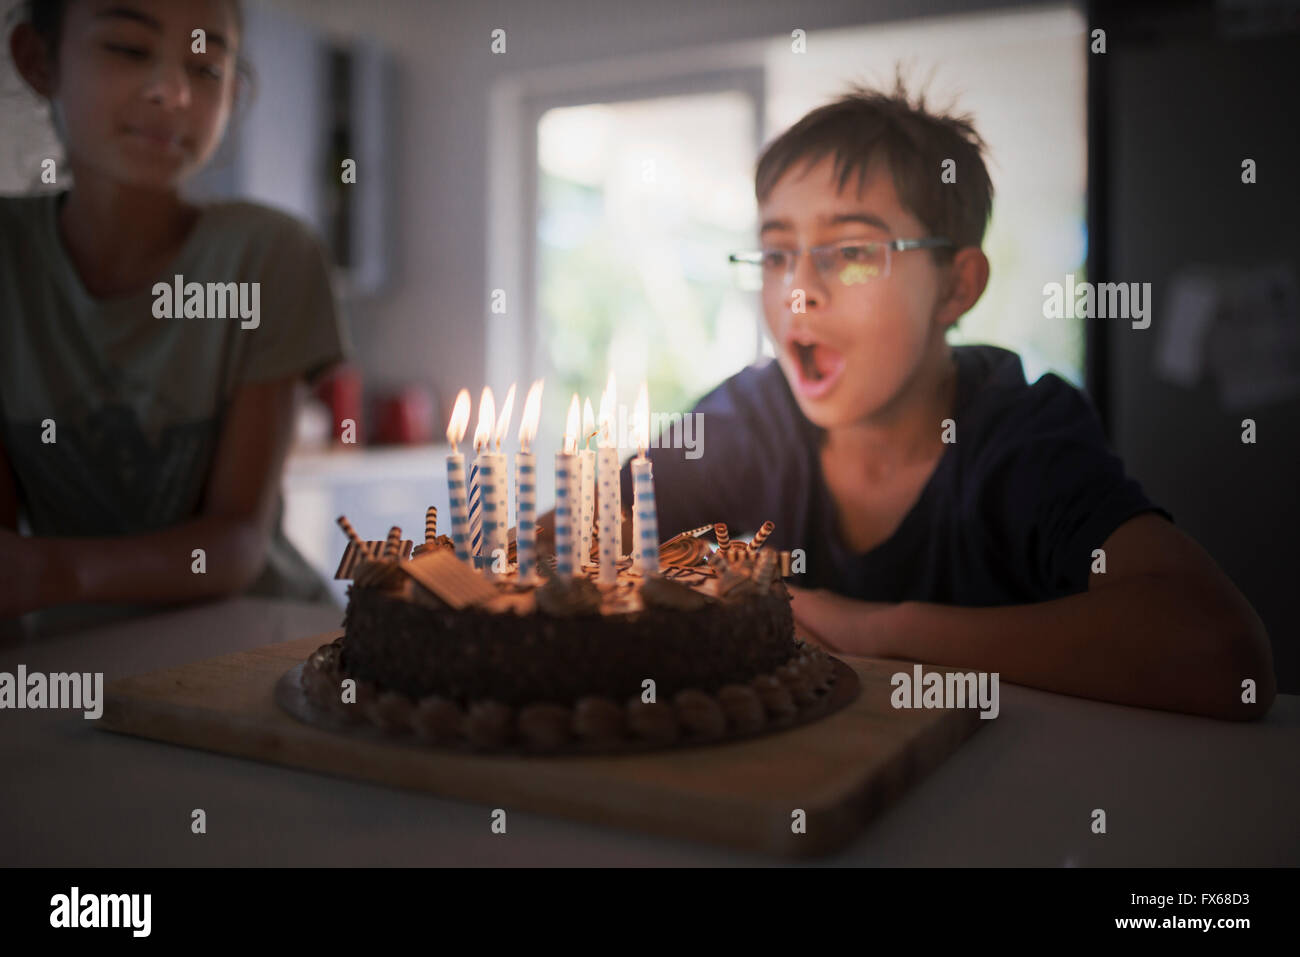 Mixed race boy blowing birthday candles Stock Photo